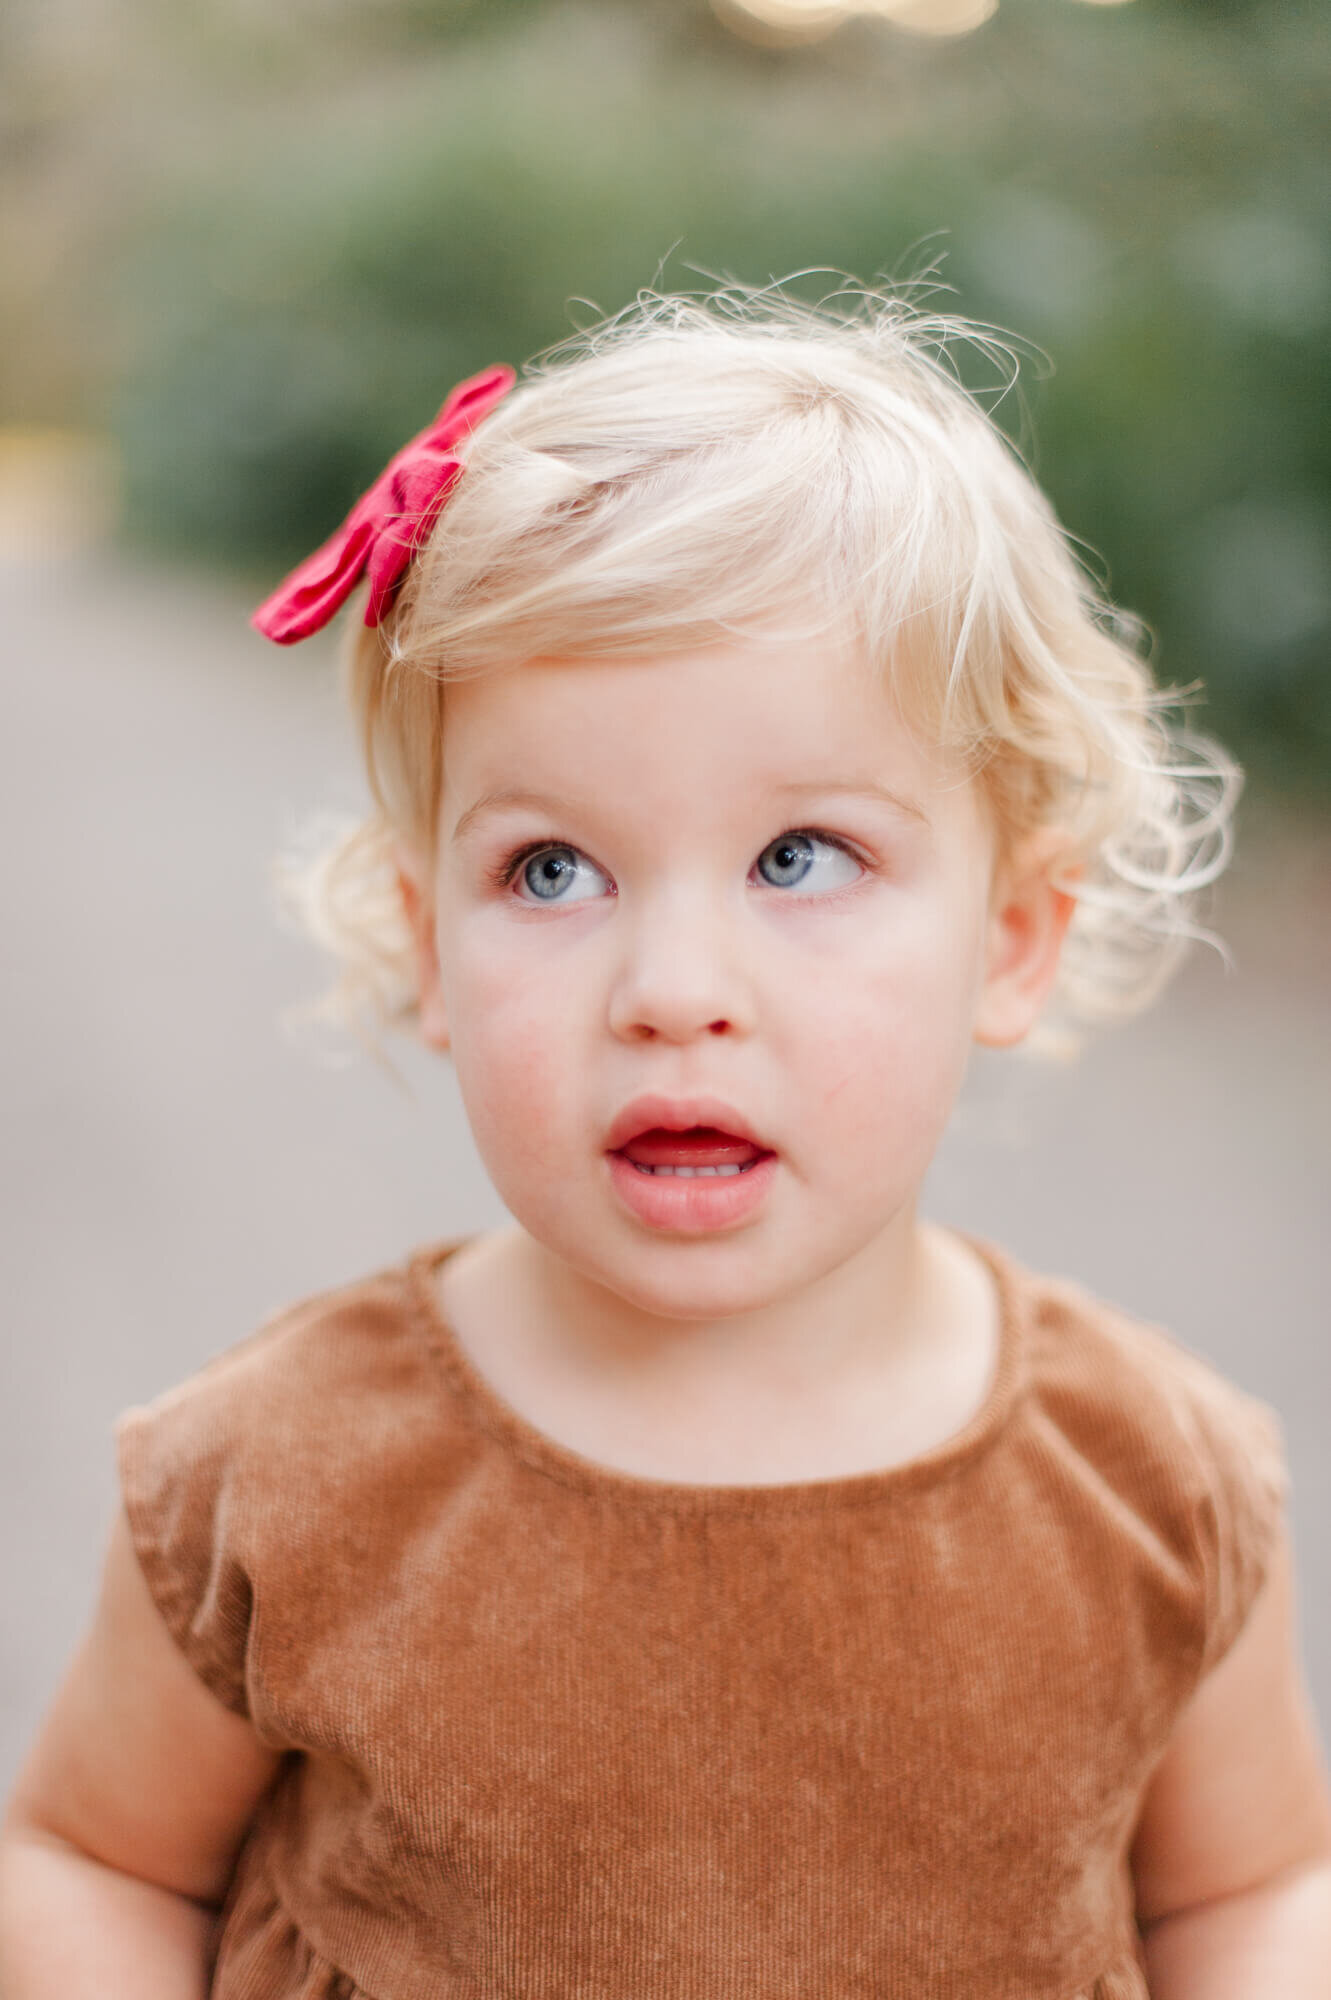 Sweet blonde curly headed toddler smiling and looking away from the camera